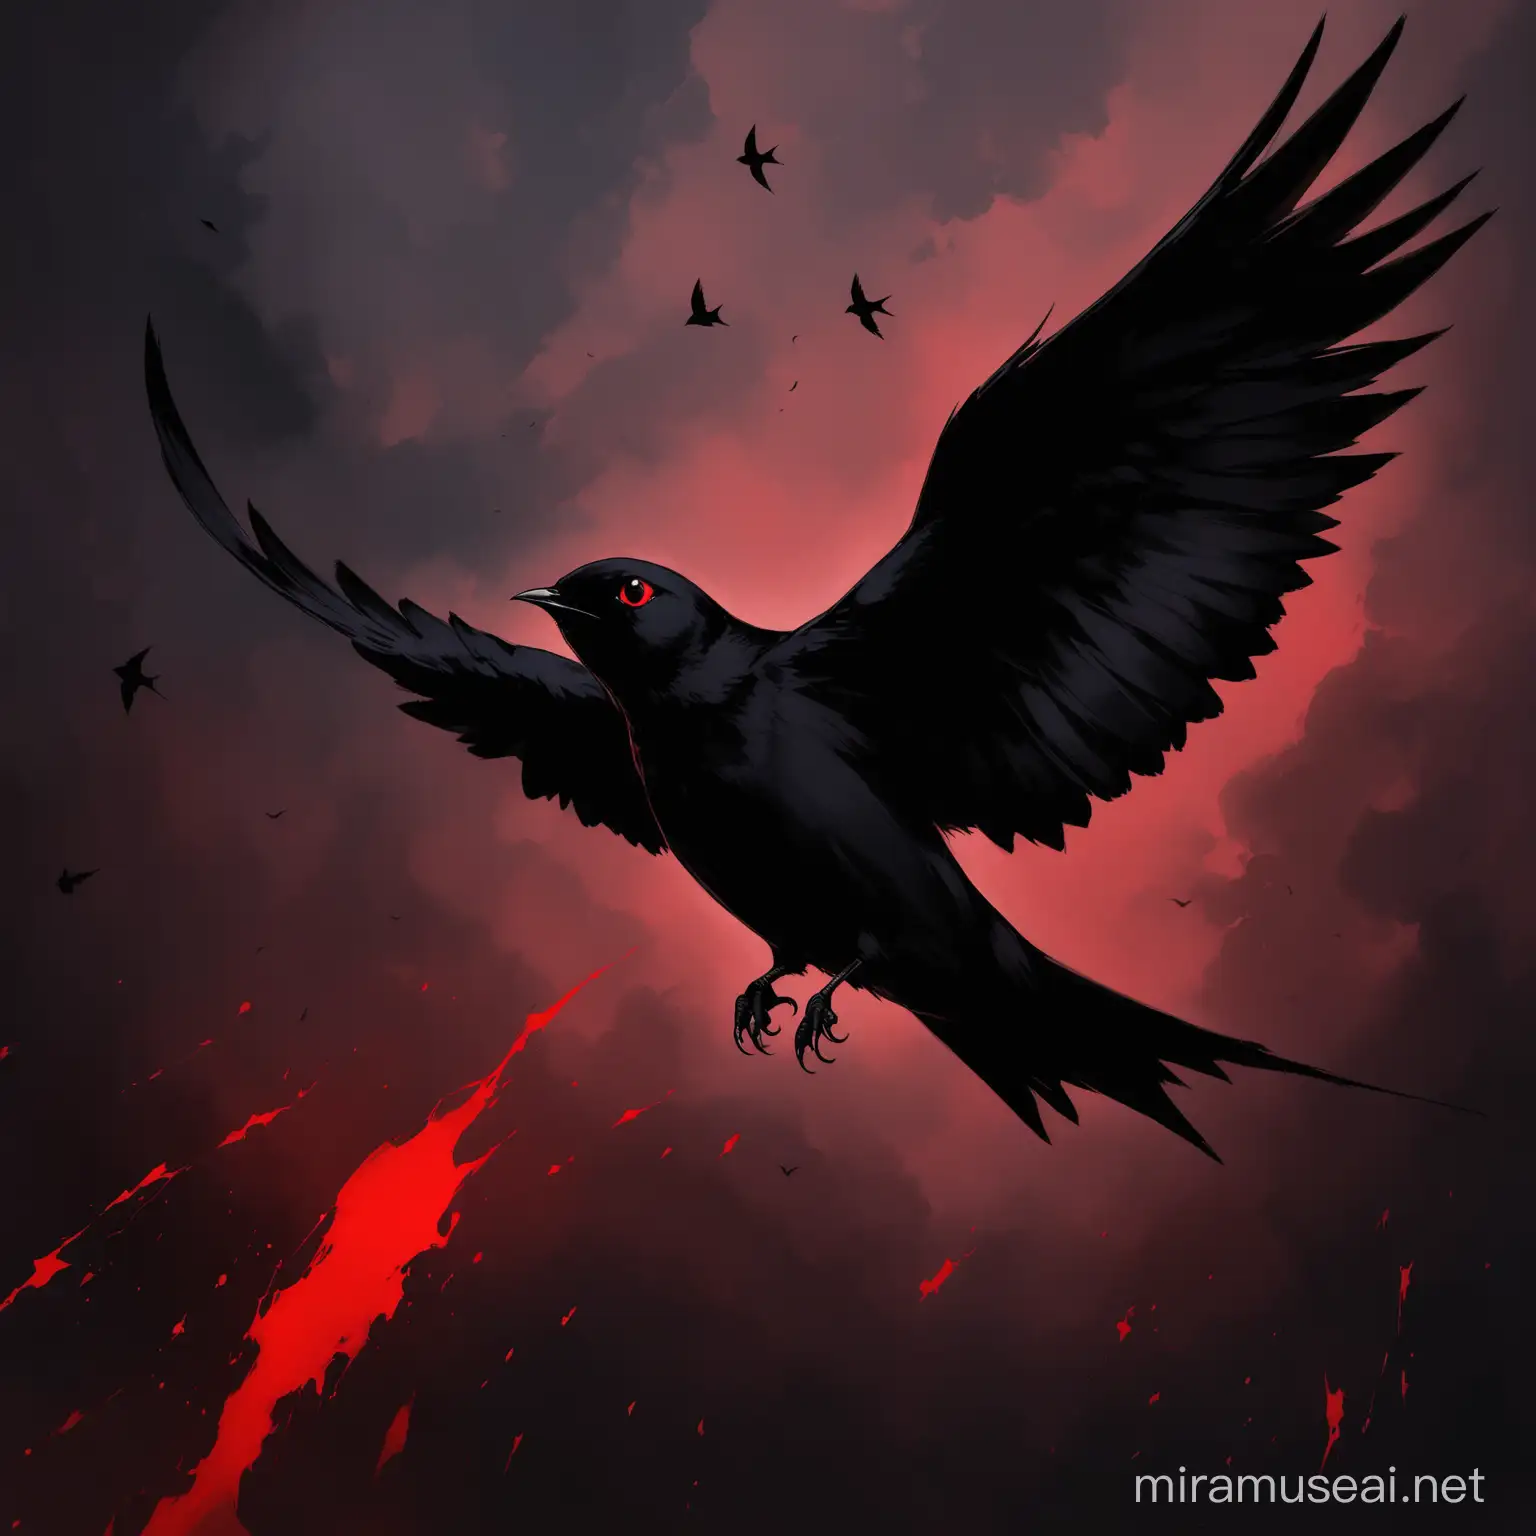 Mystical Black Swallow with Eerily Gleaming Red Eyes